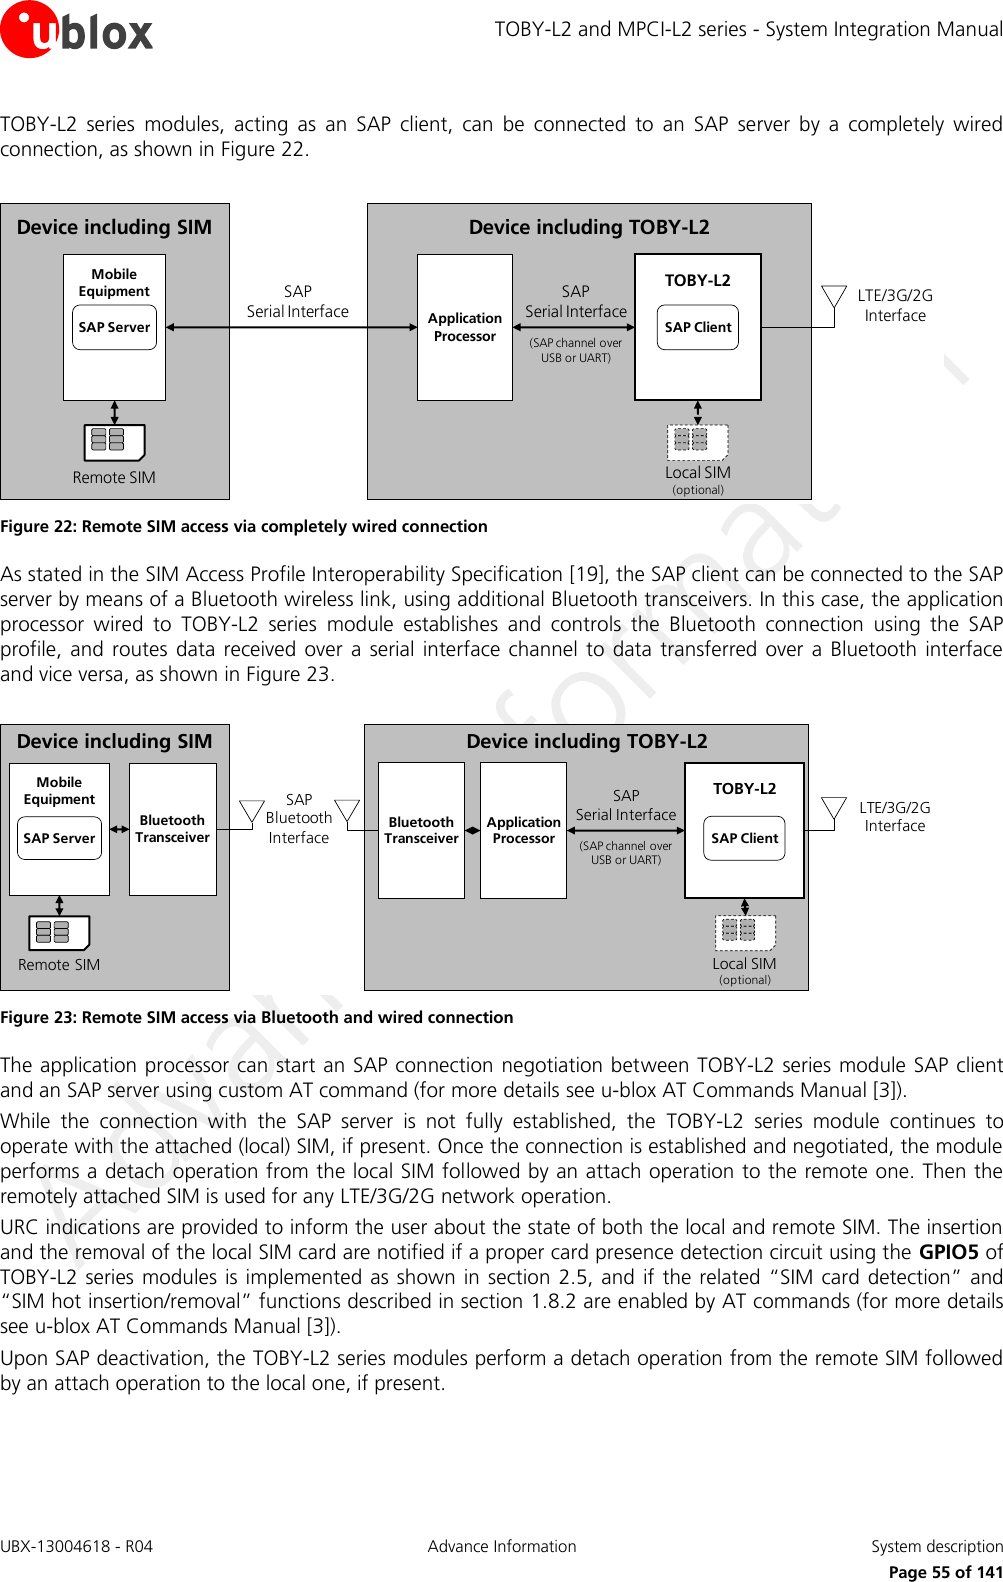 TOBY-L2 and MPCI-L2 series - System Integration Manual UBX-13004618 - R04  Advance Information  System description     Page 55 of 141 TOBY-L2  series  modules,  acting  as  an  SAP  client,  can  be  connected  to  an  SAP  server  by  a  completely  wired connection, as shown in Figure 22.  Device including TOBY-L2LTE/3G/2G InterfaceLocal SIM(optional)TOBY-L2SAP ClientApplicationProcessorDevice including SIMSAP                   Serial InterfaceRemote SIMMobileEquipmentSAP ServerSAP              Serial Interface(SAP channel over USB or UART) Figure 22: Remote SIM access via completely wired connection As stated in the SIM Access Profile Interoperability Specification [19], the SAP client can be connected to the SAP server by means of a Bluetooth wireless link, using additional Bluetooth transceivers. In this case, the application processor  wired  to  TOBY-L2  series  module  establishes  and  controls  the  Bluetooth  connection  using  the  SAP profile, and routes  data  received  over  a serial  interface  channel  to  data  transferred over  a Bluetooth interface and vice versa, as shown in Figure 23.  Device including TOBY-L2SAP              Serial Interface(SAP channel over USB or UART)LTE/3G/2G InterfaceLocal SIM(optional)TOBY-L2SAP ClientApplicationProcessorSAP  Bluetooth InterfaceBluetoothTransceiverDevice including SIMRemote SIMMobileEquipmentSAP ServerBluetoothTransceiver Figure 23: Remote SIM access via Bluetooth and wired connection The application processor can start an SAP connection negotiation between TOBY-L2 series module SAP client and an SAP server using custom AT command (for more details see u-blox AT Commands Manual [3]). While  the  connection  with  the  SAP  server  is  not  fully  established,  the  TOBY-L2  series  module  continues  to operate with the attached (local) SIM, if present. Once the connection is established and negotiated, the module performs a detach operation from the local SIM followed by an attach operation to the remote one. Then the remotely attached SIM is used for any LTE/3G/2G network operation. URC indications are provided to inform the user about the state of both the local and remote SIM. The insertion and the removal of the local SIM card are notified if a proper card presence detection circuit using the GPIO5 of TOBY-L2  series modules is implemented as shown  in  section 2.5, and  if  the  related “SIM card detection” and “SIM hot insertion/removal” functions described in section 1.8.2 are enabled by AT commands (for more details see u-blox AT Commands Manual [3]). Upon SAP deactivation, the TOBY-L2 series modules perform a detach operation from the remote SIM followed by an attach operation to the local one, if present.  